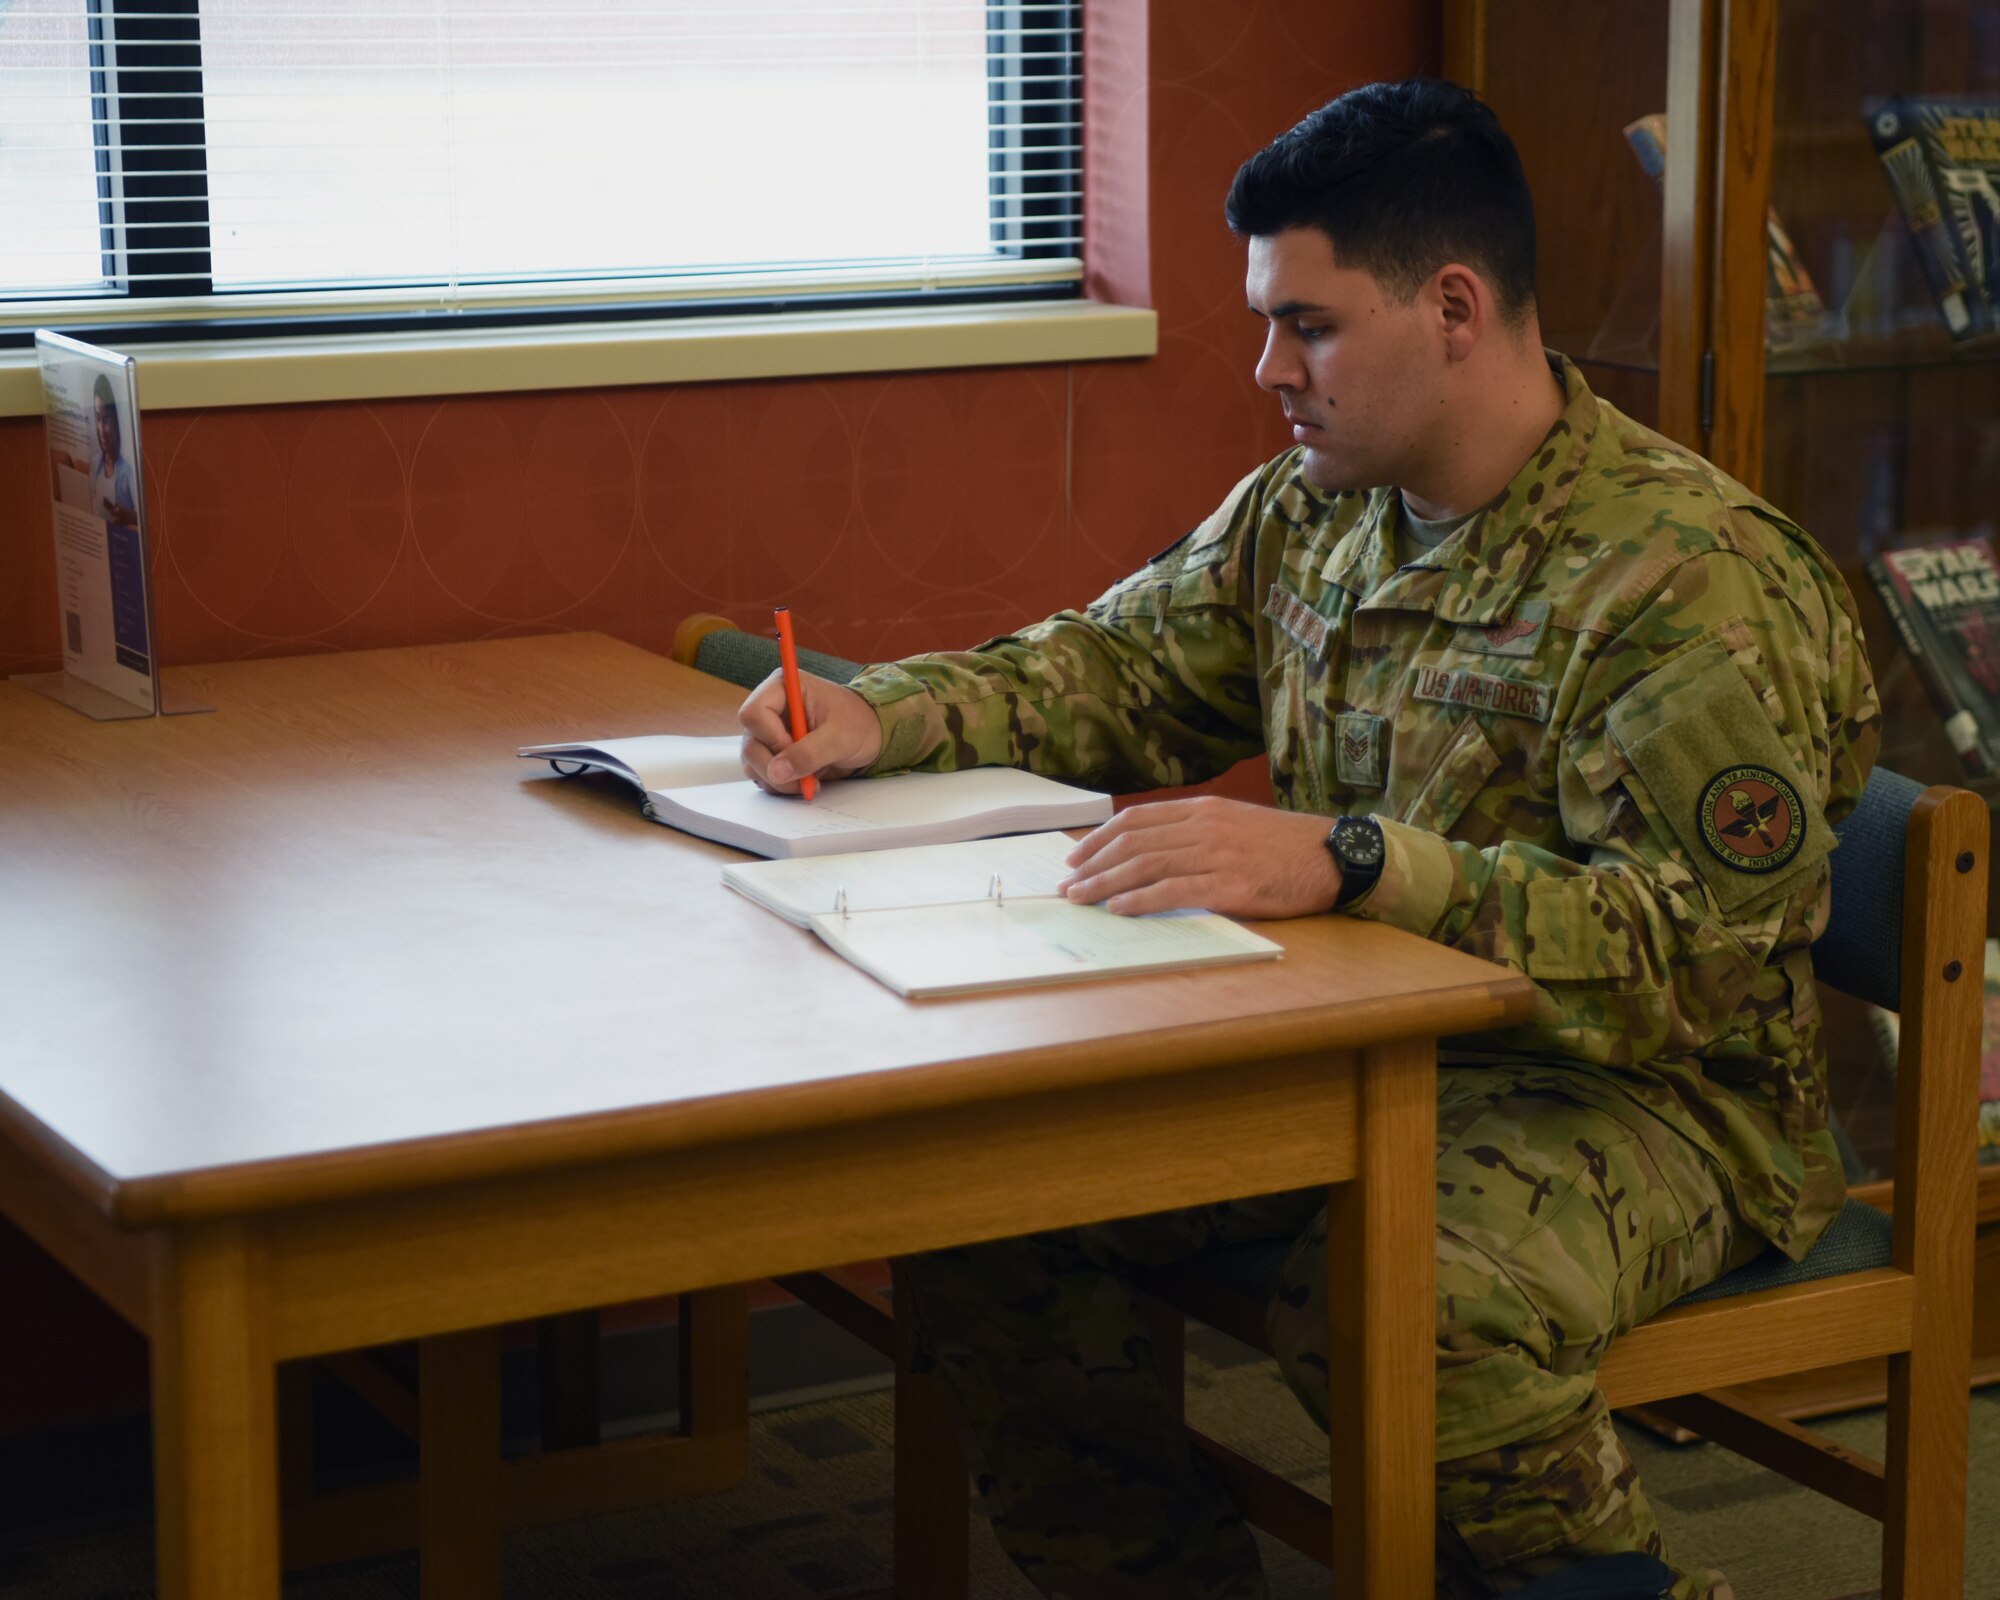 U.S. Air Force Staff Sgt. Ramon Ramirez-Mendez, 316th Training Squadron instructor, takes notes at the Consolidated Learning Center, Goodfellow Air Force Base, Texas, May 23, 2022. Ramirez-Mendez selected a general psychology class to understand ways to engage his students and improve their learning. (U.S. Air Force photo by Senior Airman Ethan Sherwood)